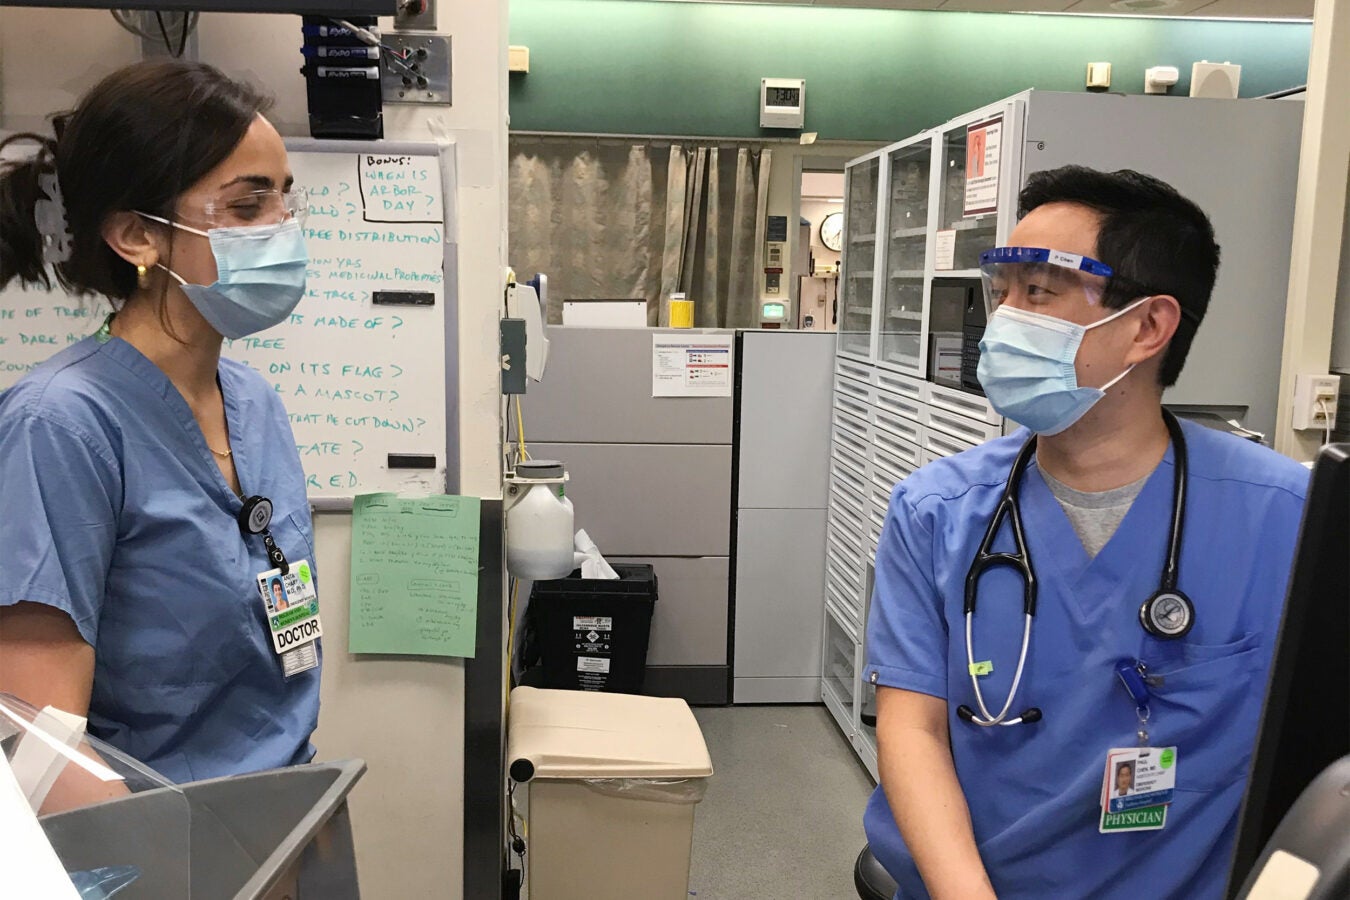 Anita Chary and Paul Chen in their PPE.